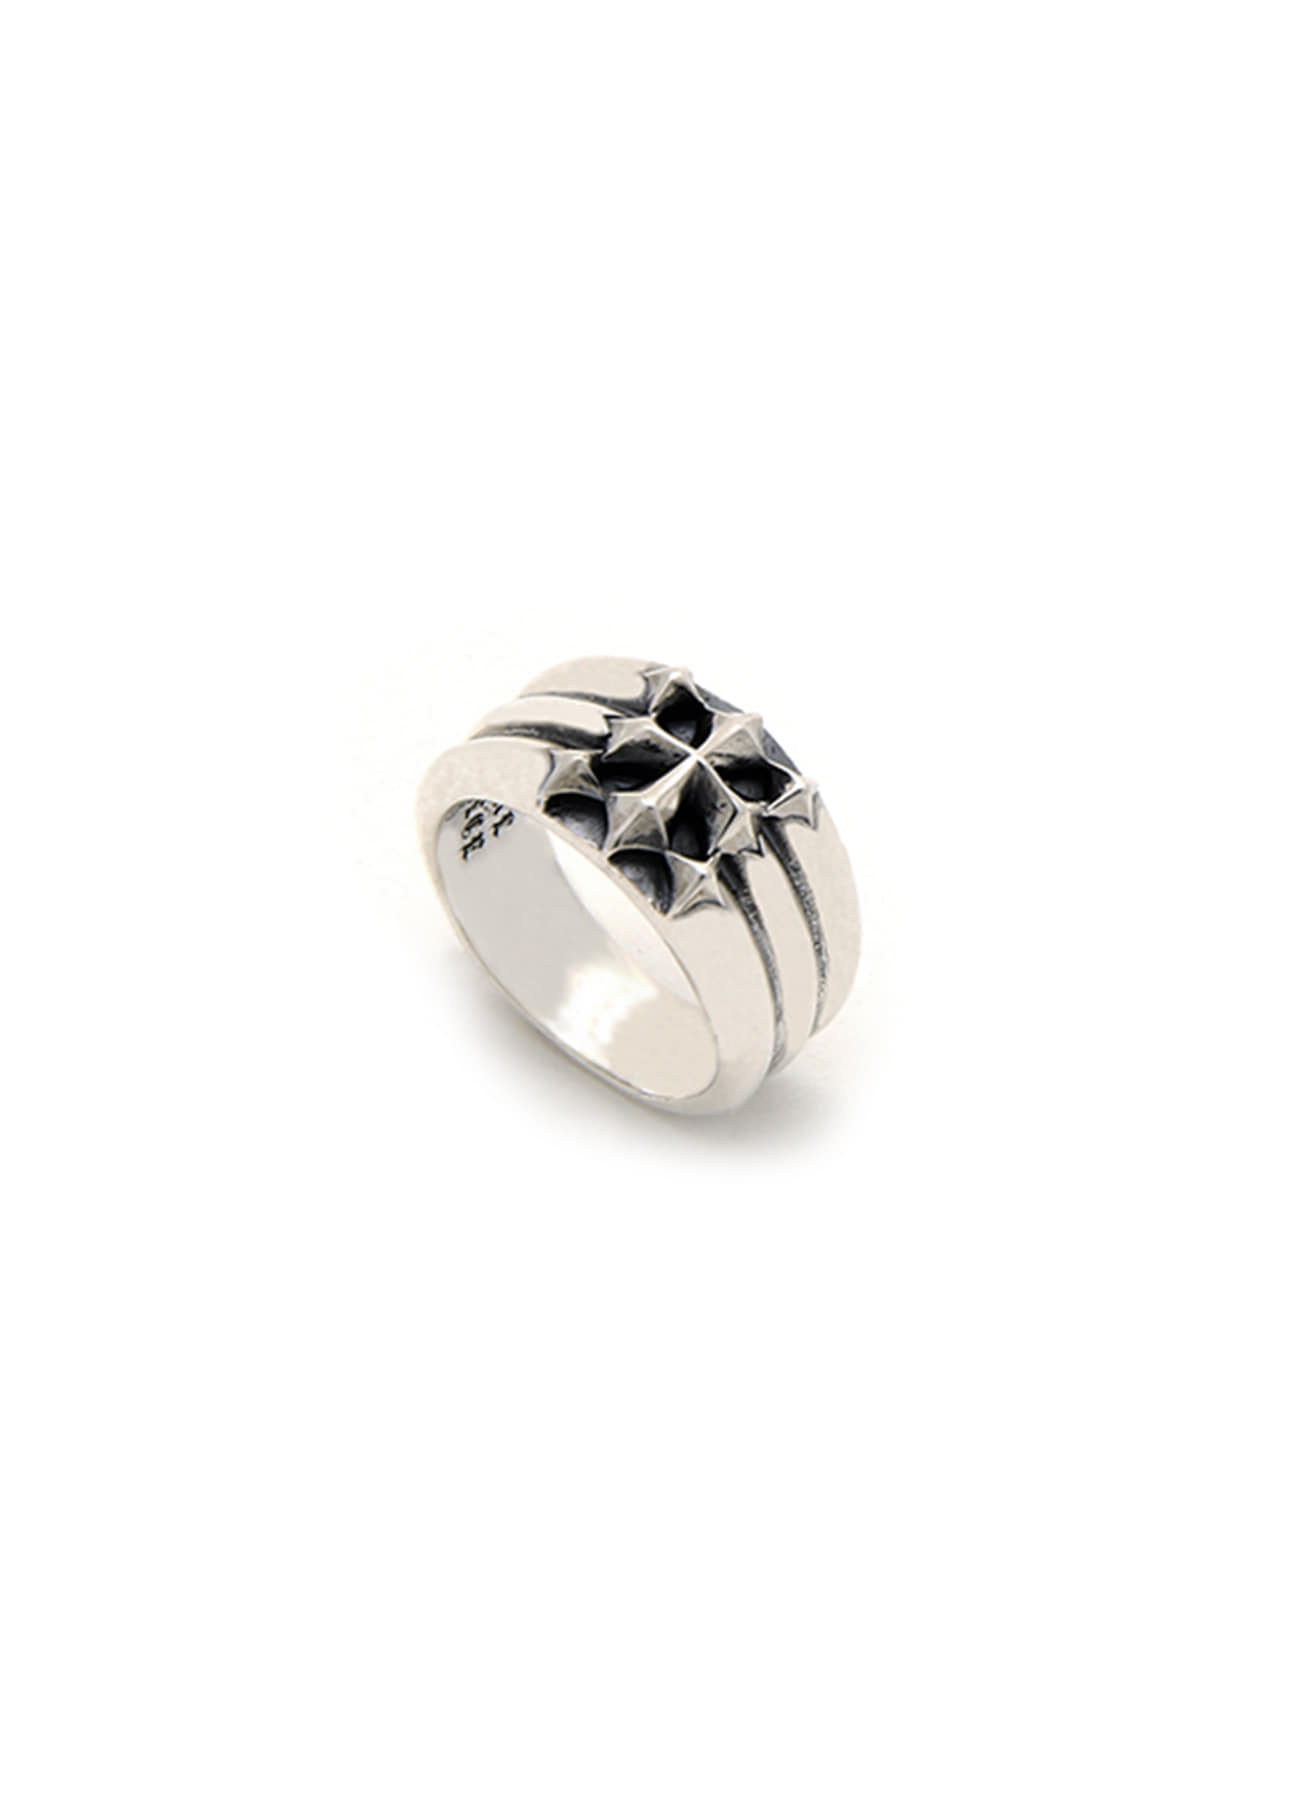 CROSS 4 POINT SILVER RING